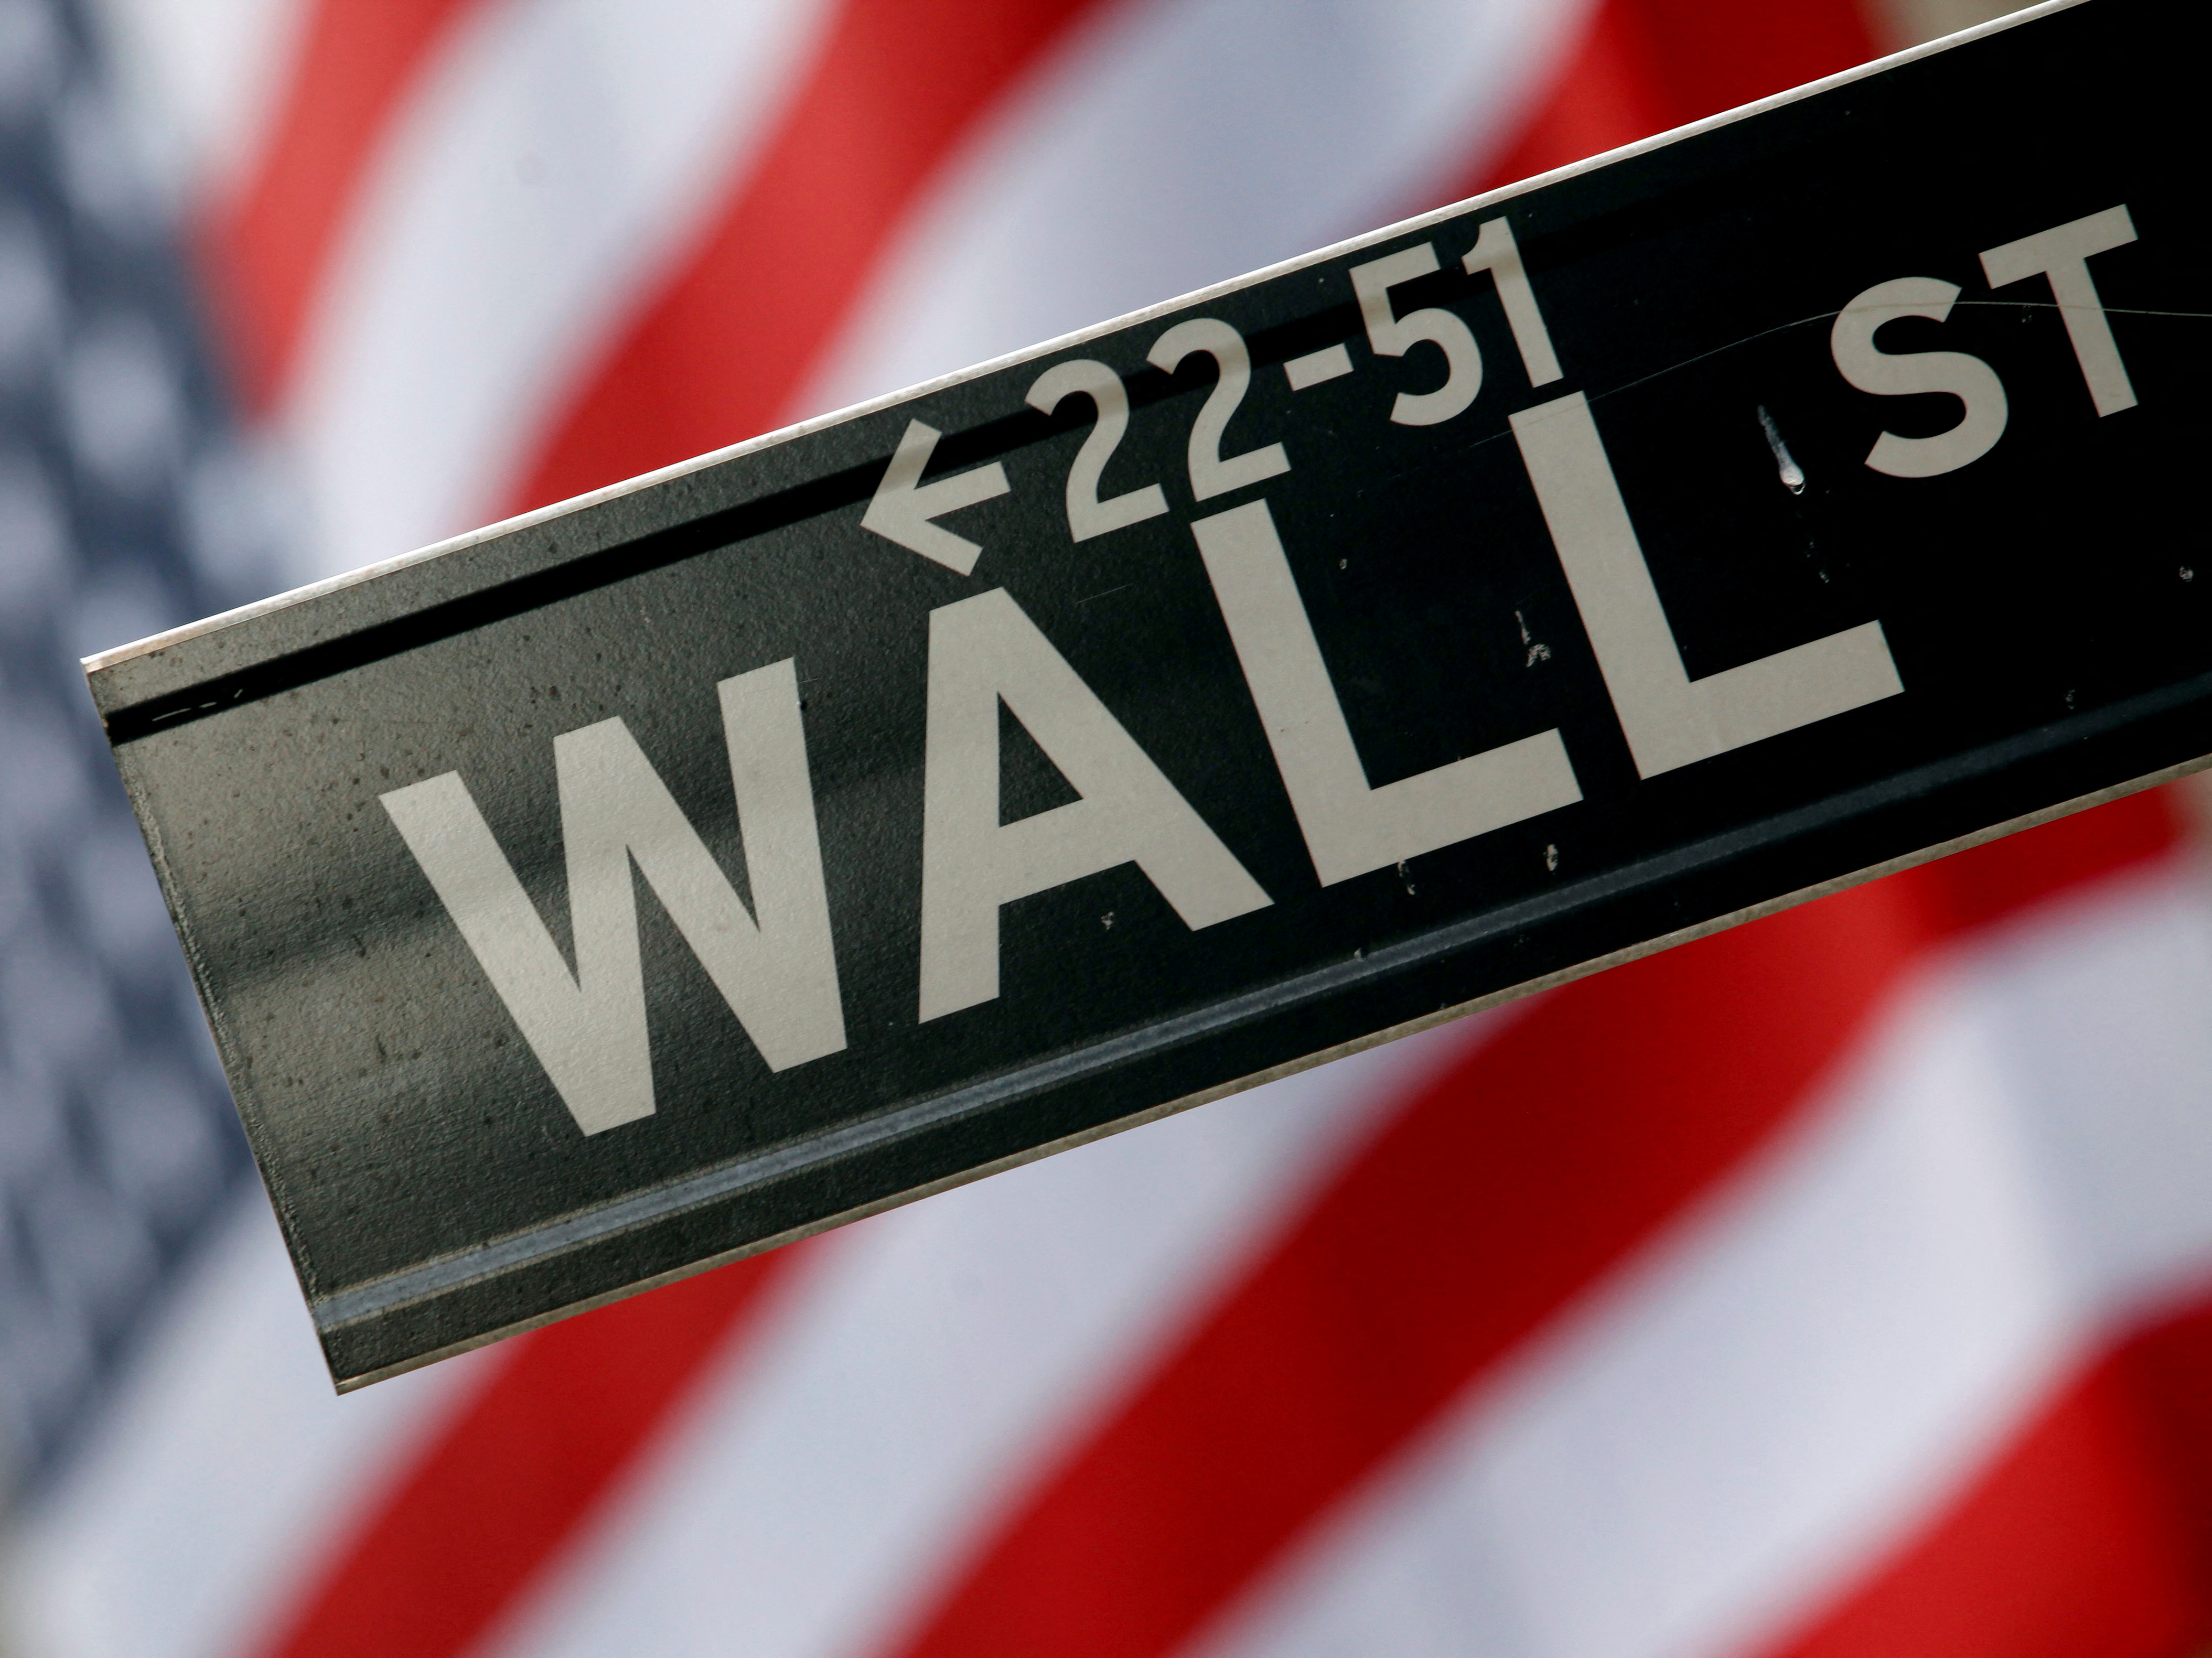 FILE PHOTO: A street sign is seen in front of the New York Stock Exchange on Wall Street in New York, February 10, 2009. REUTERS/Eric Thayer/File Photo